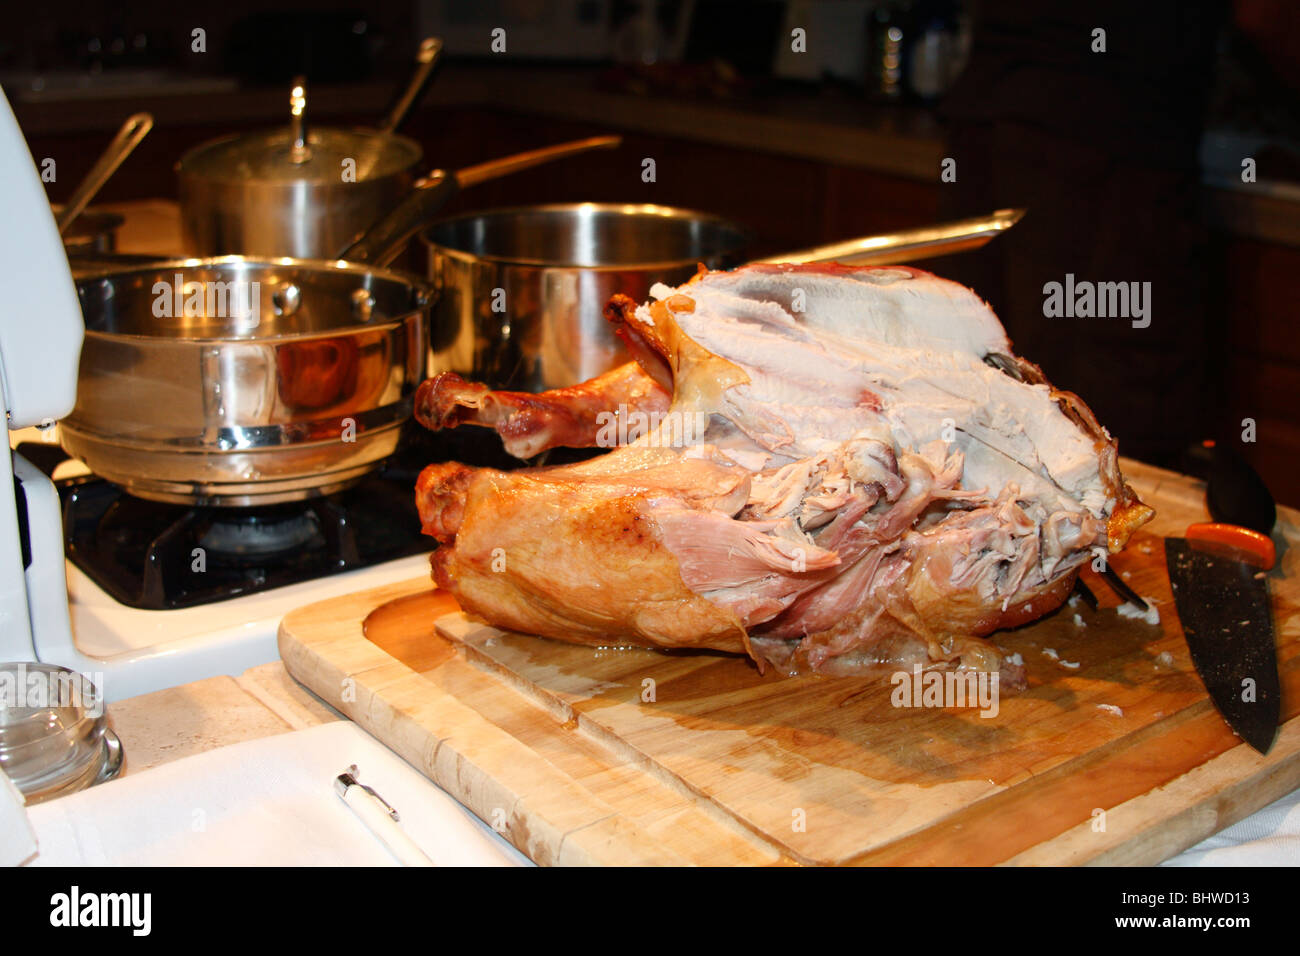 TURKEY THERMOMETER ROAST COOKED TEMPERATURE Cooking meat thermometer  inserted showing ideal temperature (190F) for cooked roast Turkey at  Christmas Stock Photo - Alamy